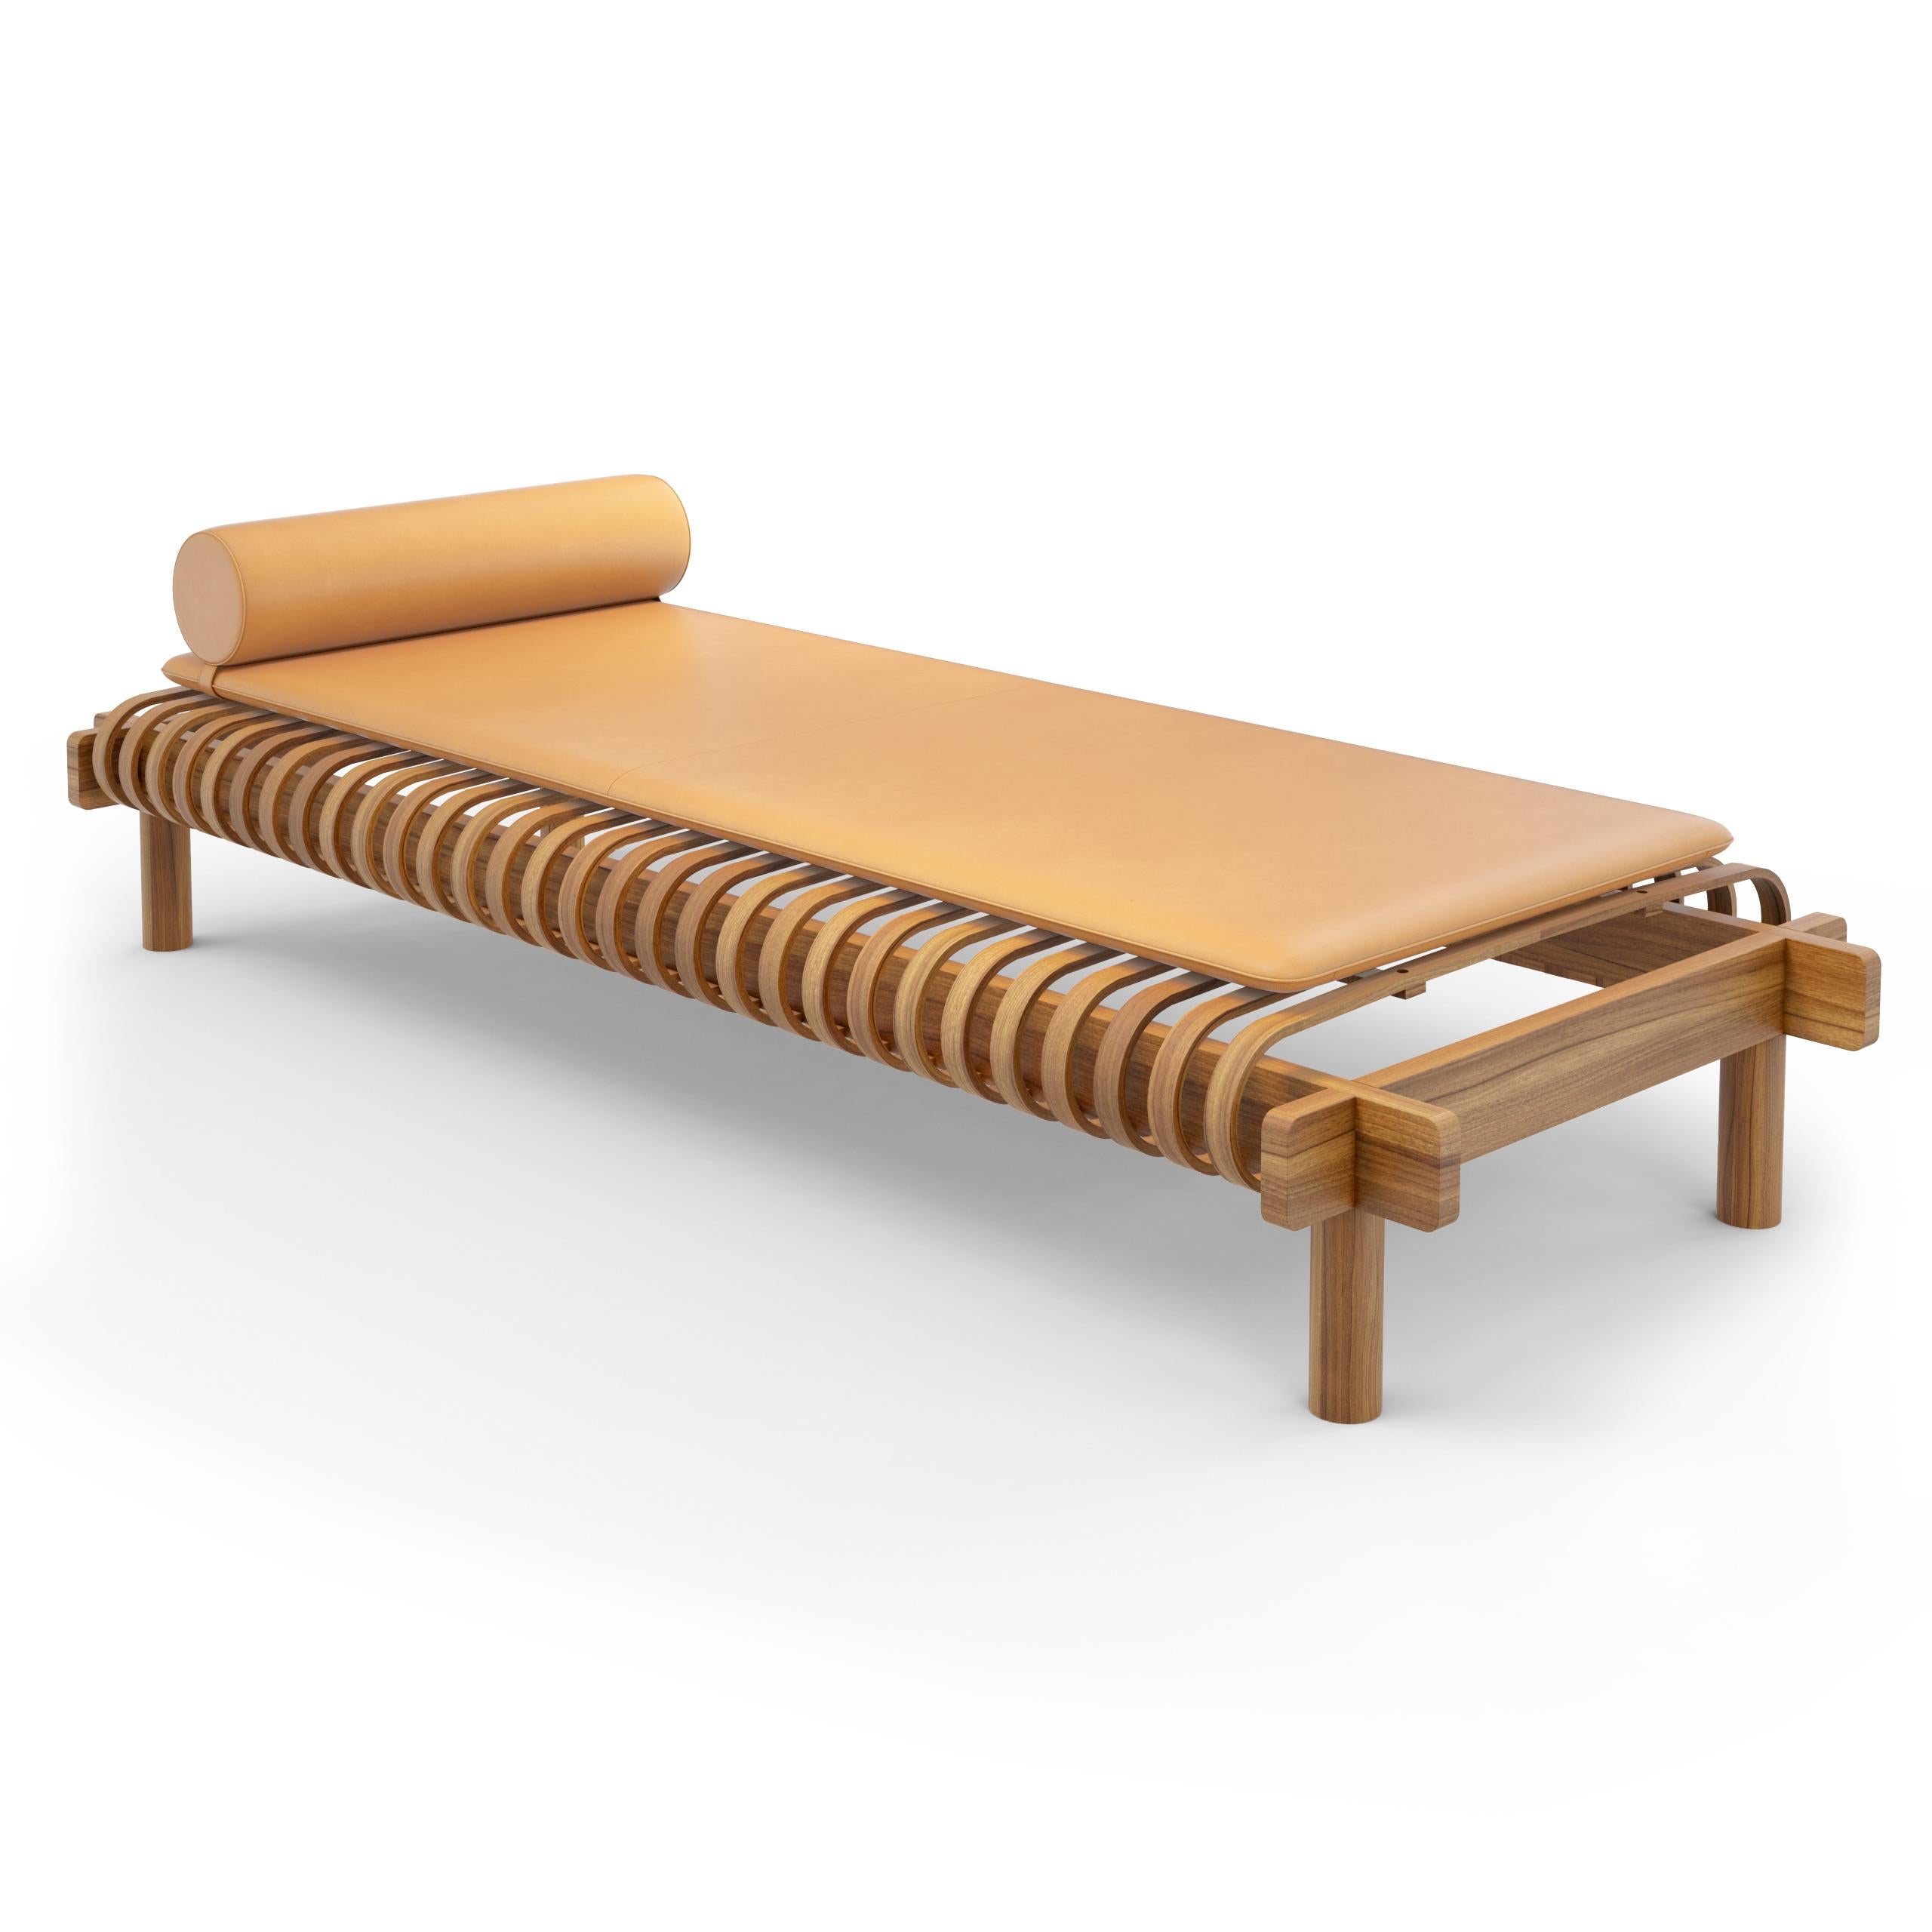 Italian Limited Edition Charlotte Perriand Tokyo Dormeuse by Cassina For Sale